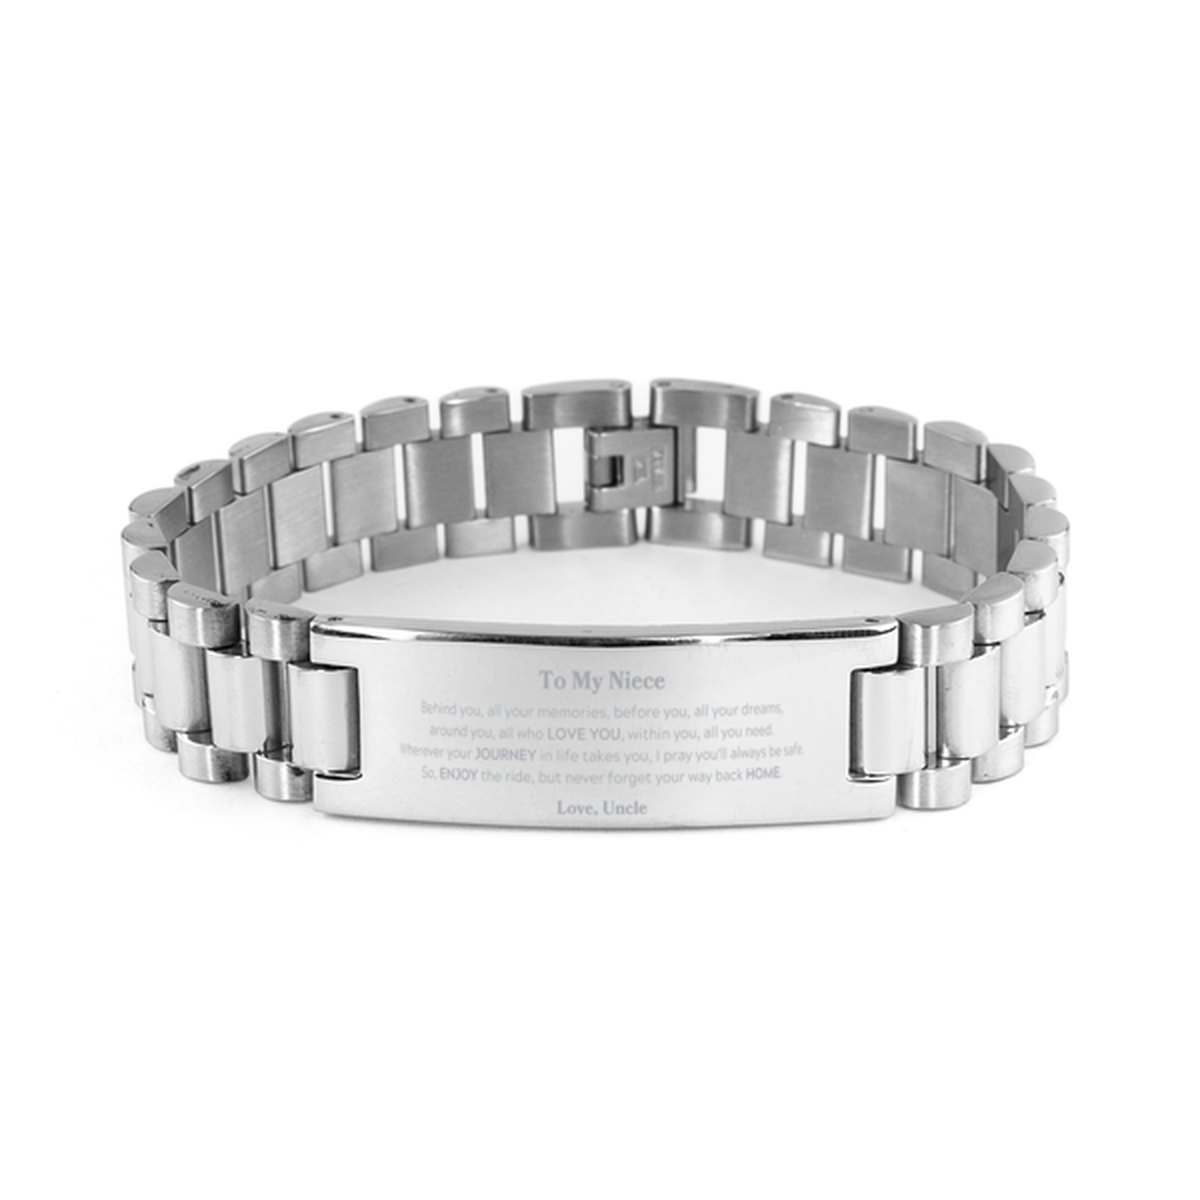 To My Niece Graduation Gifts from Uncle, Niece Ladder Stainless Steel Bracelet Christmas Birthday Gifts for Niece Behind you, all your memories, before you, all your dreams. Love, Uncle